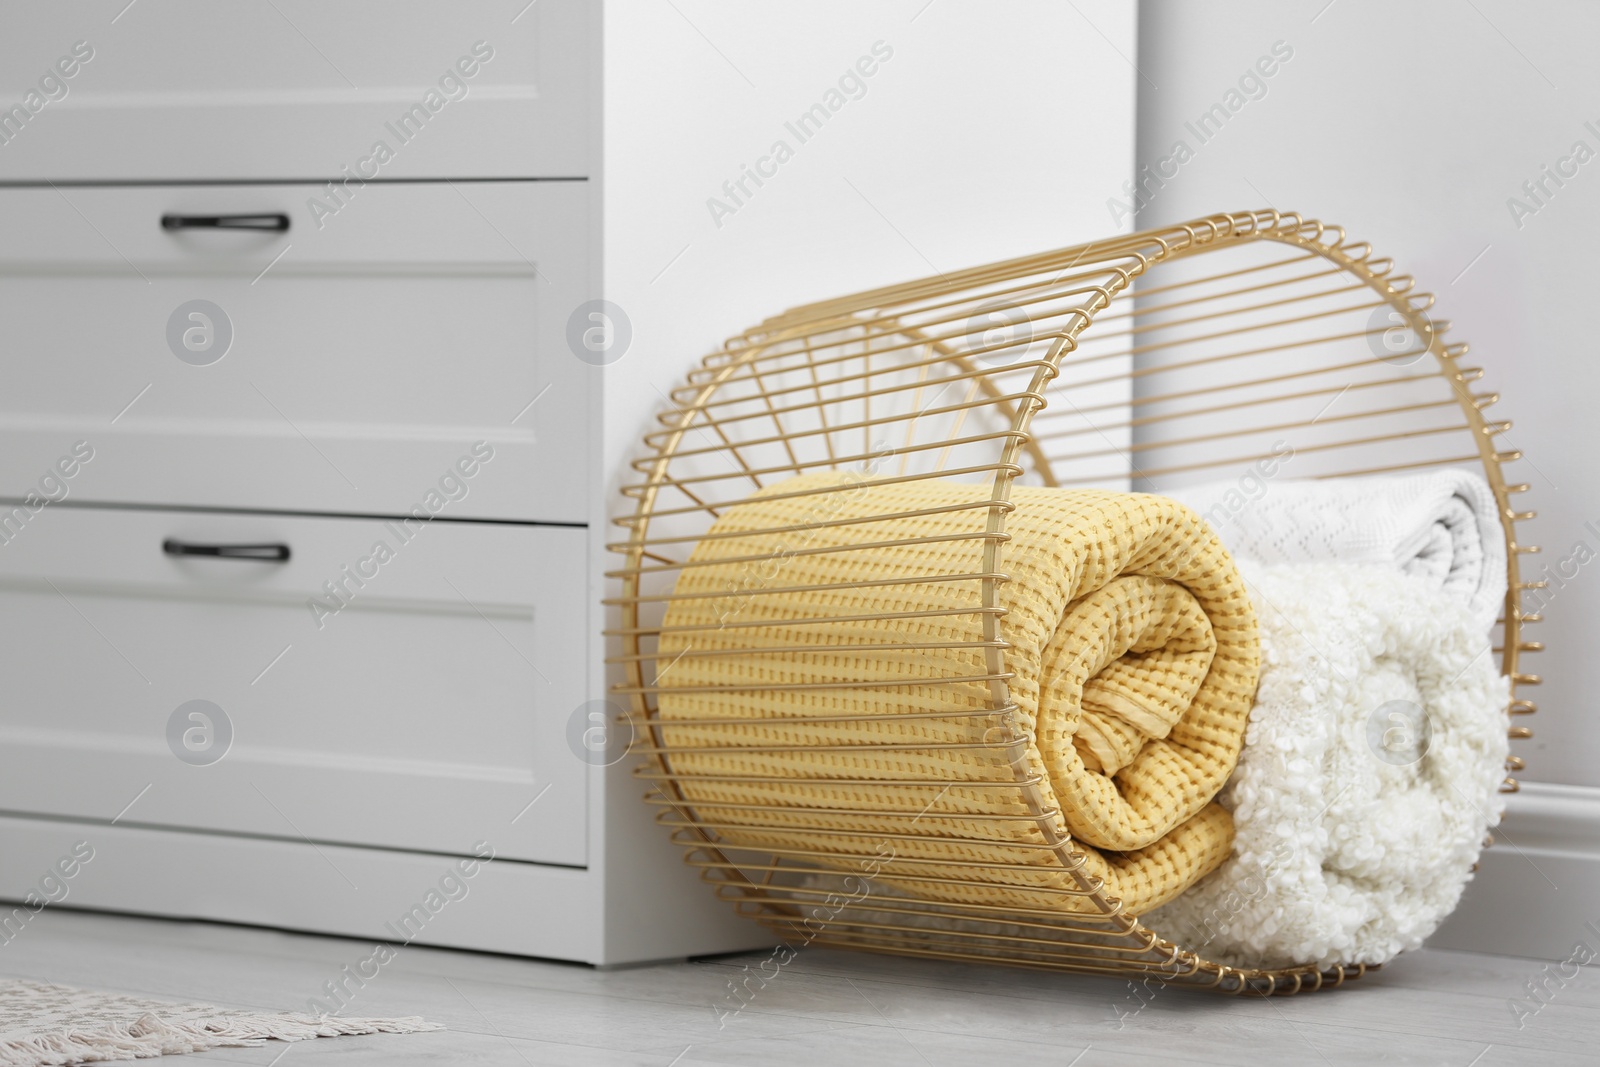 Photo of Basket with soft plaid near commode in room